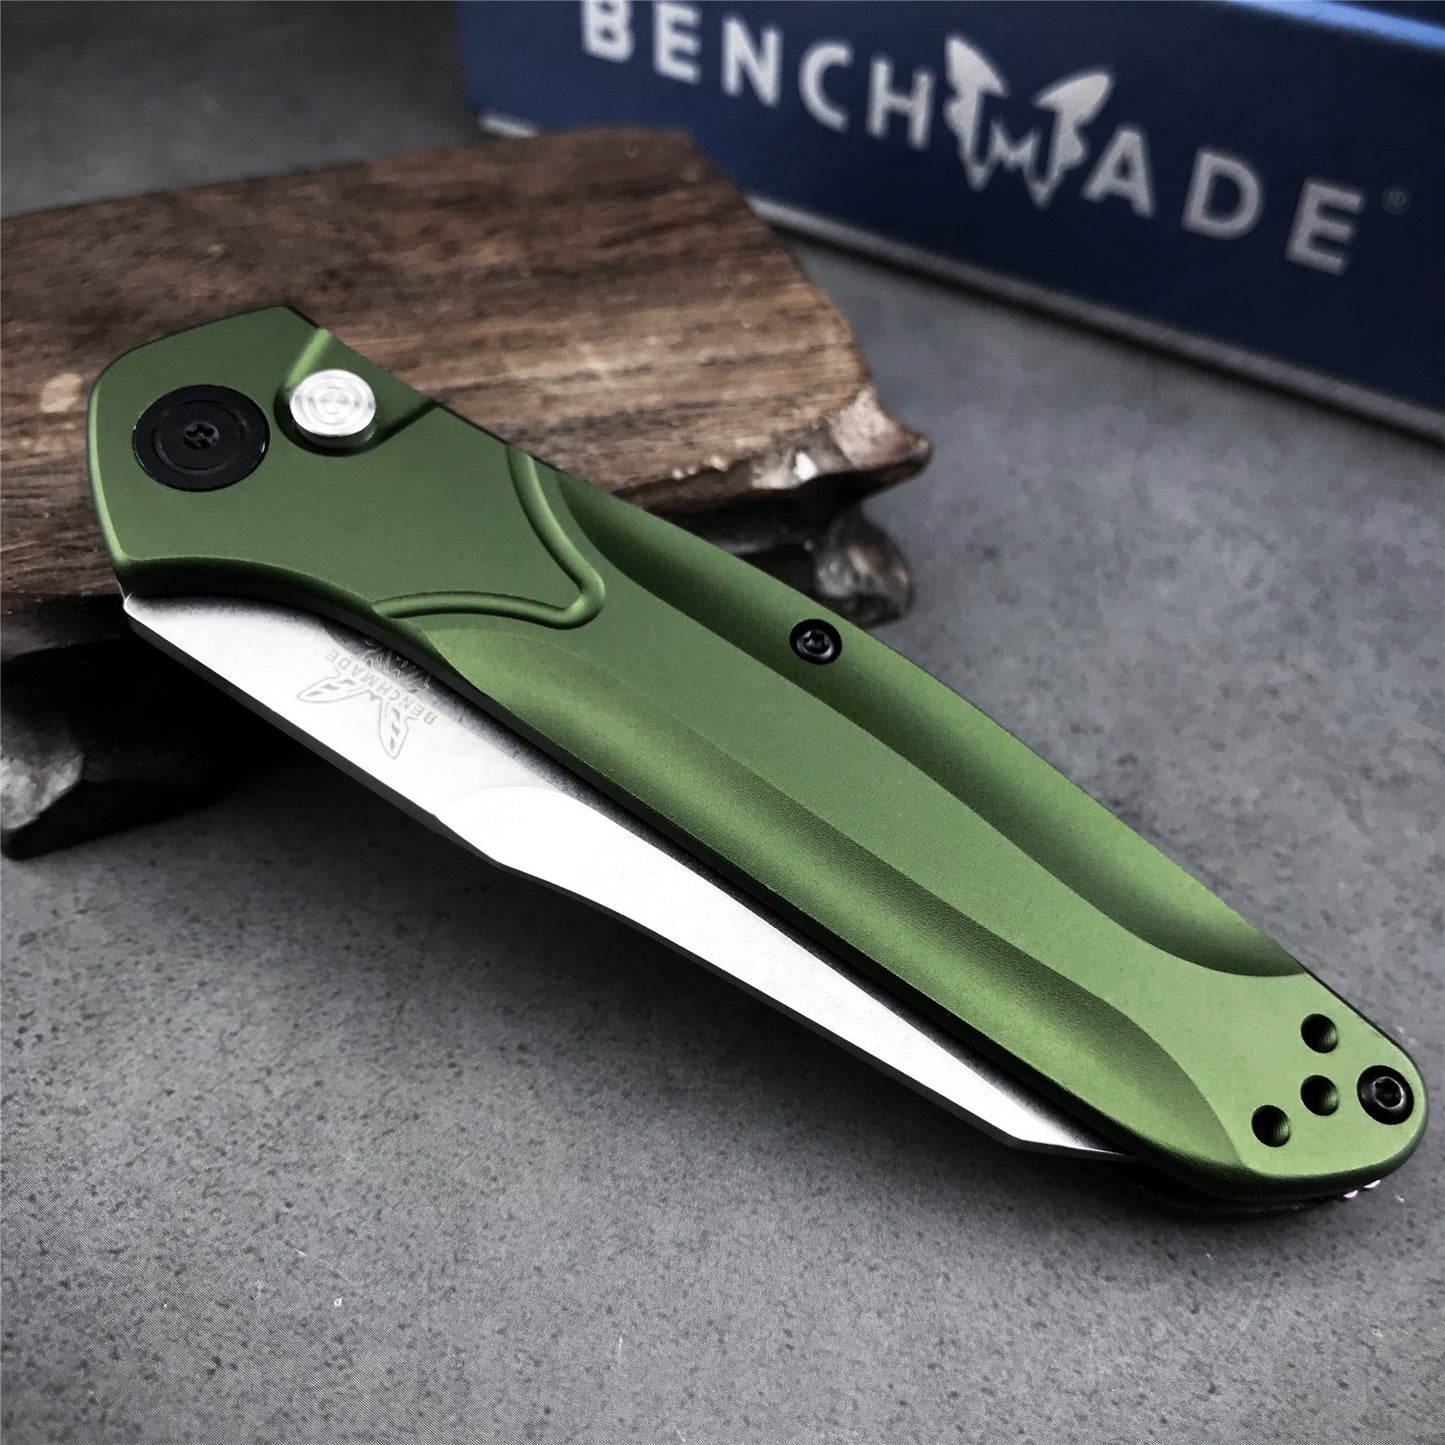 Benchmade 9400 Osborne AUTO Spring Folding Knife 3.4" S30V Blade,6061 T6 Aluminum Alloy Handle Tactical Spring Assisted Knives Camping Hunting Hand Tools